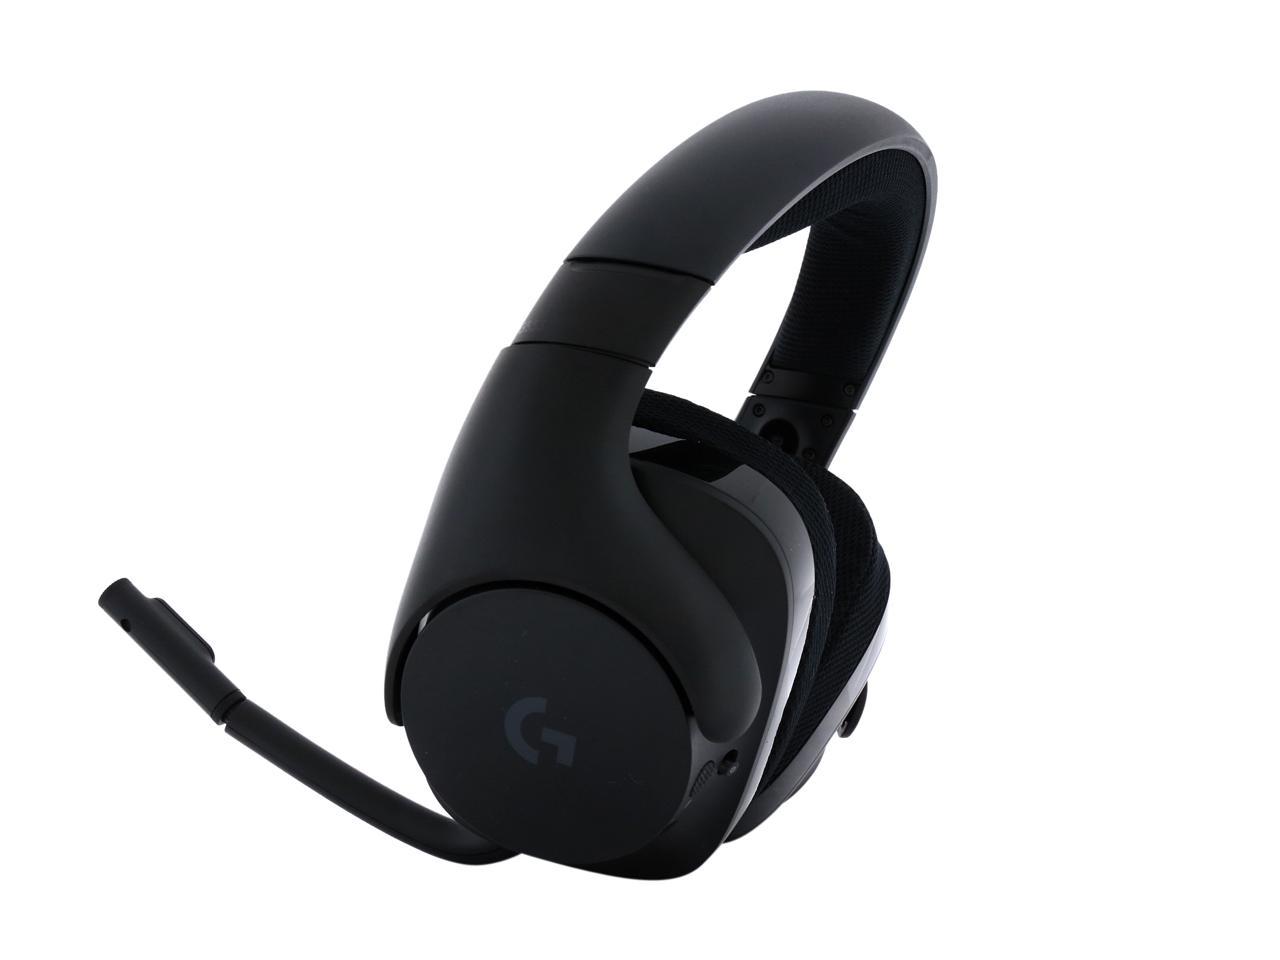 alias Conclusie Afdeling Logitech G533 Wireless DTS 7.1 Surround Sound Gaming Headset - Newegg.com